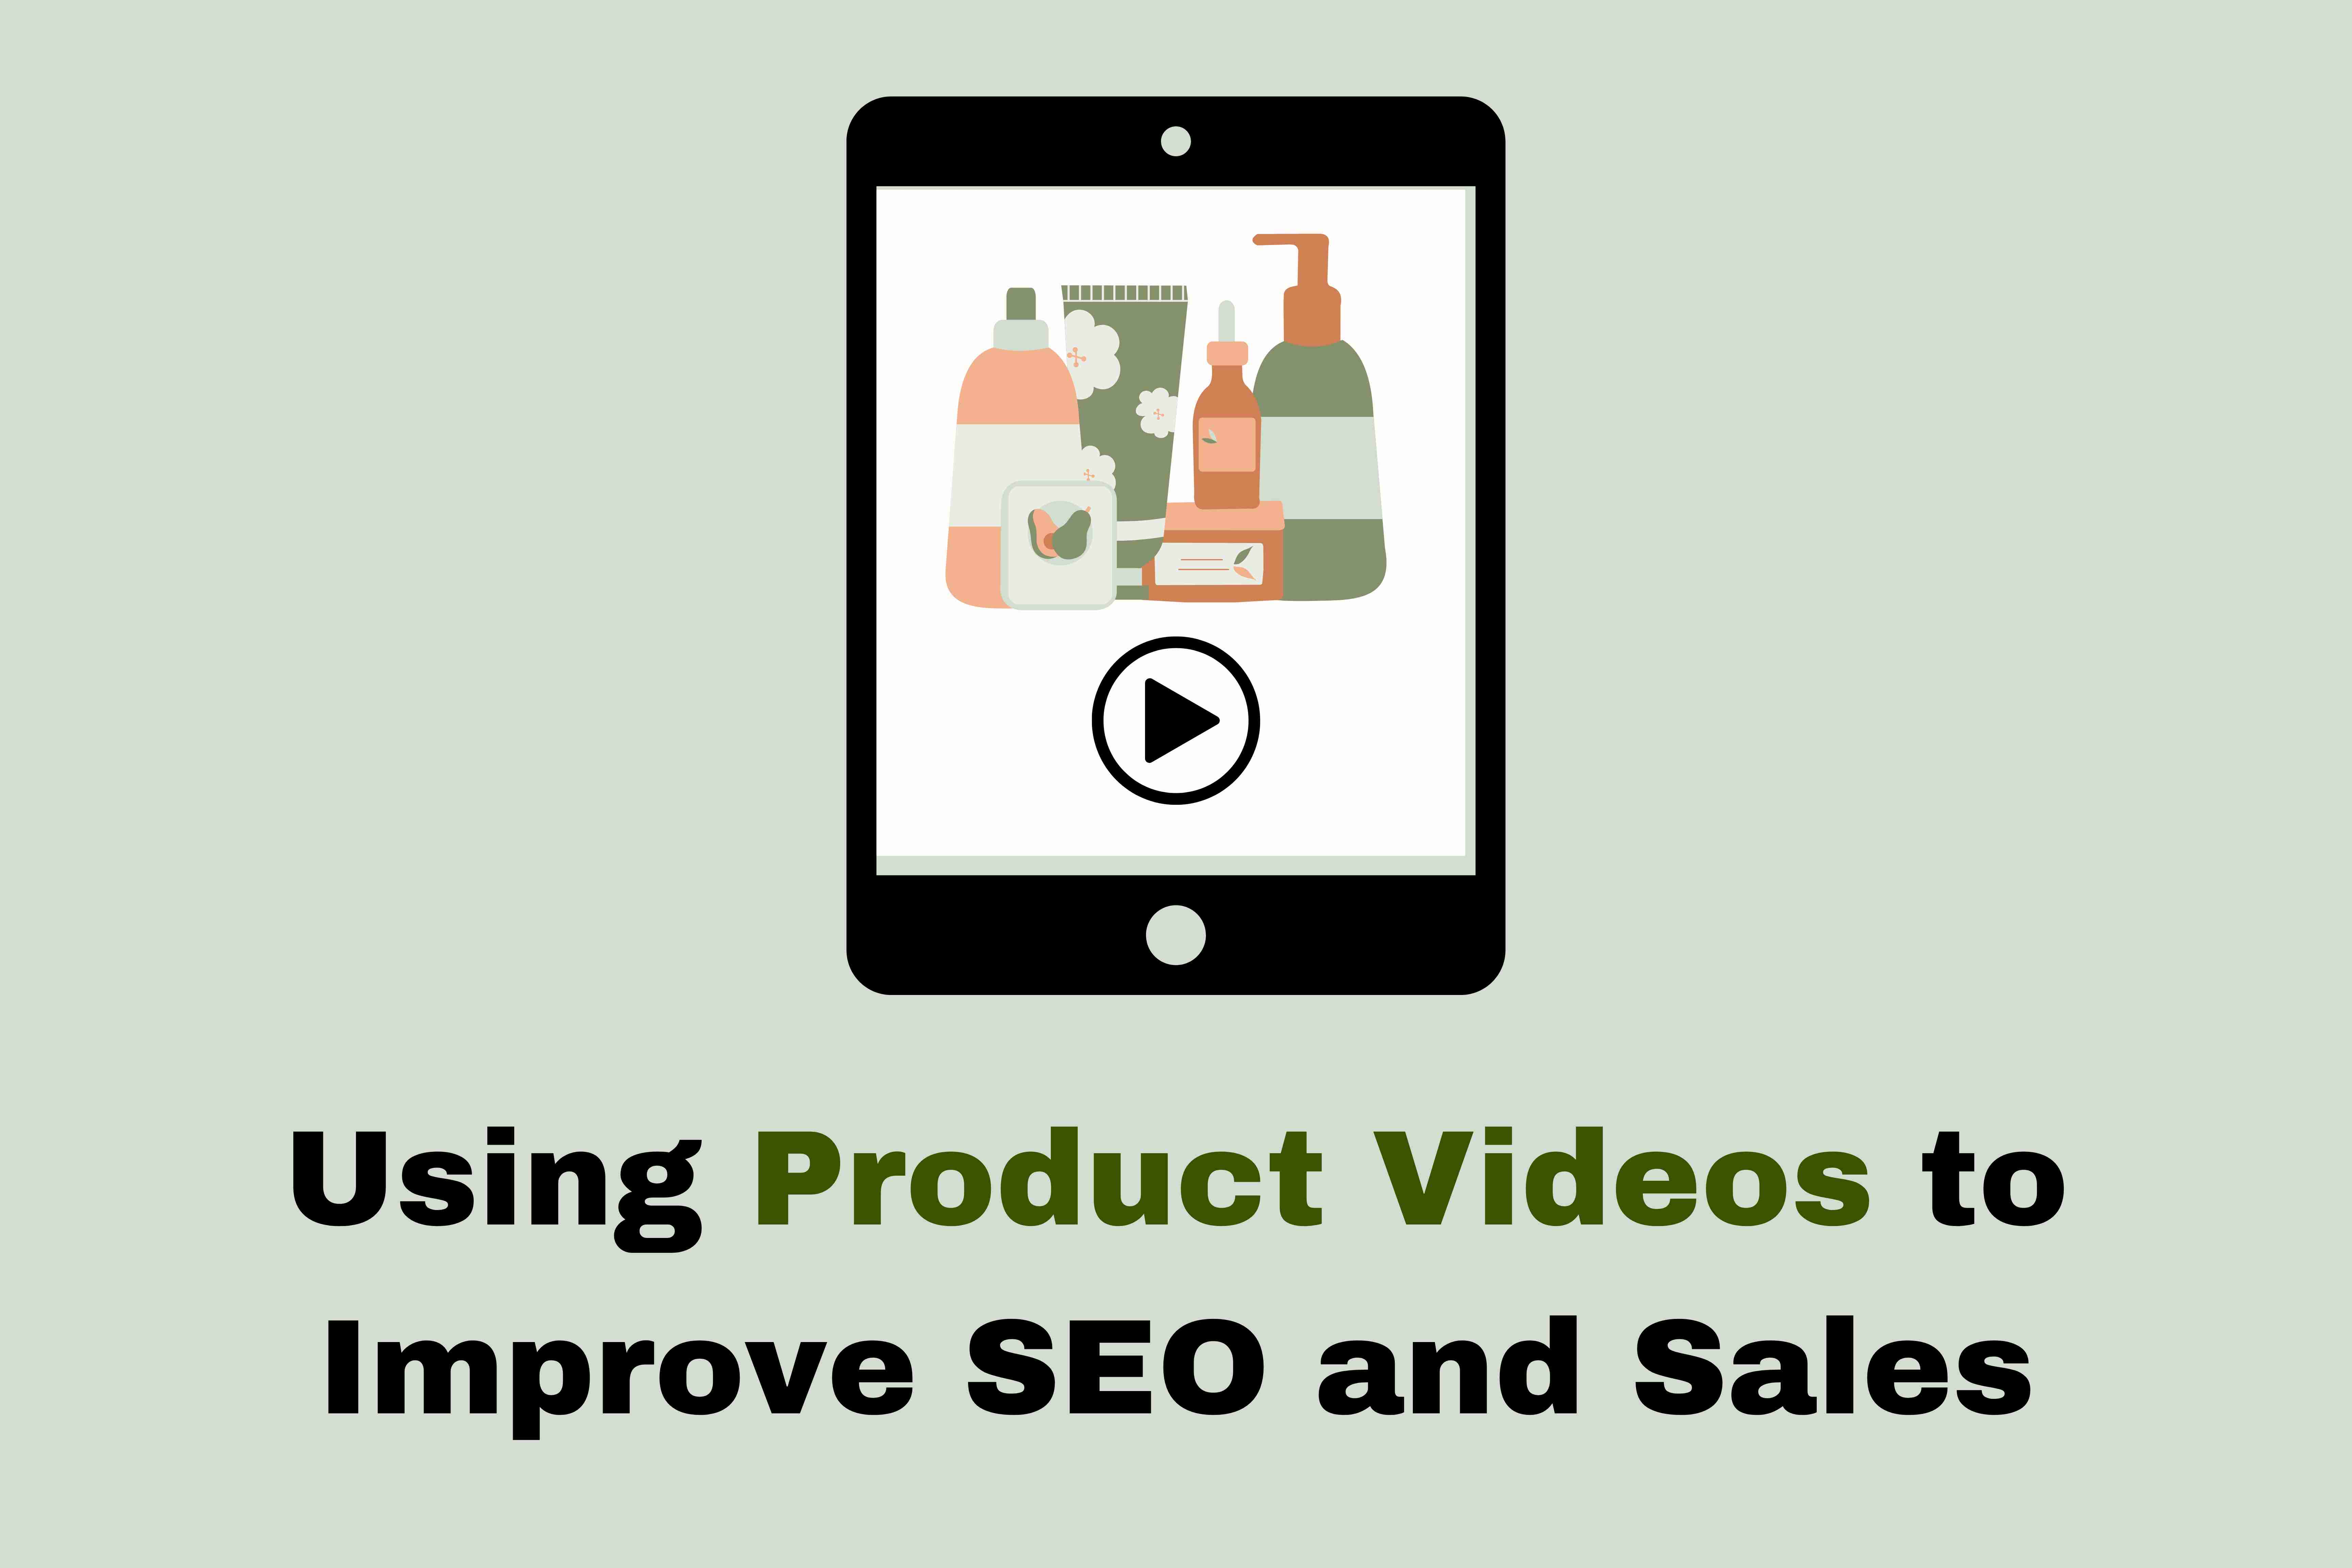 Using Product Videos to Improve SEO and Sales